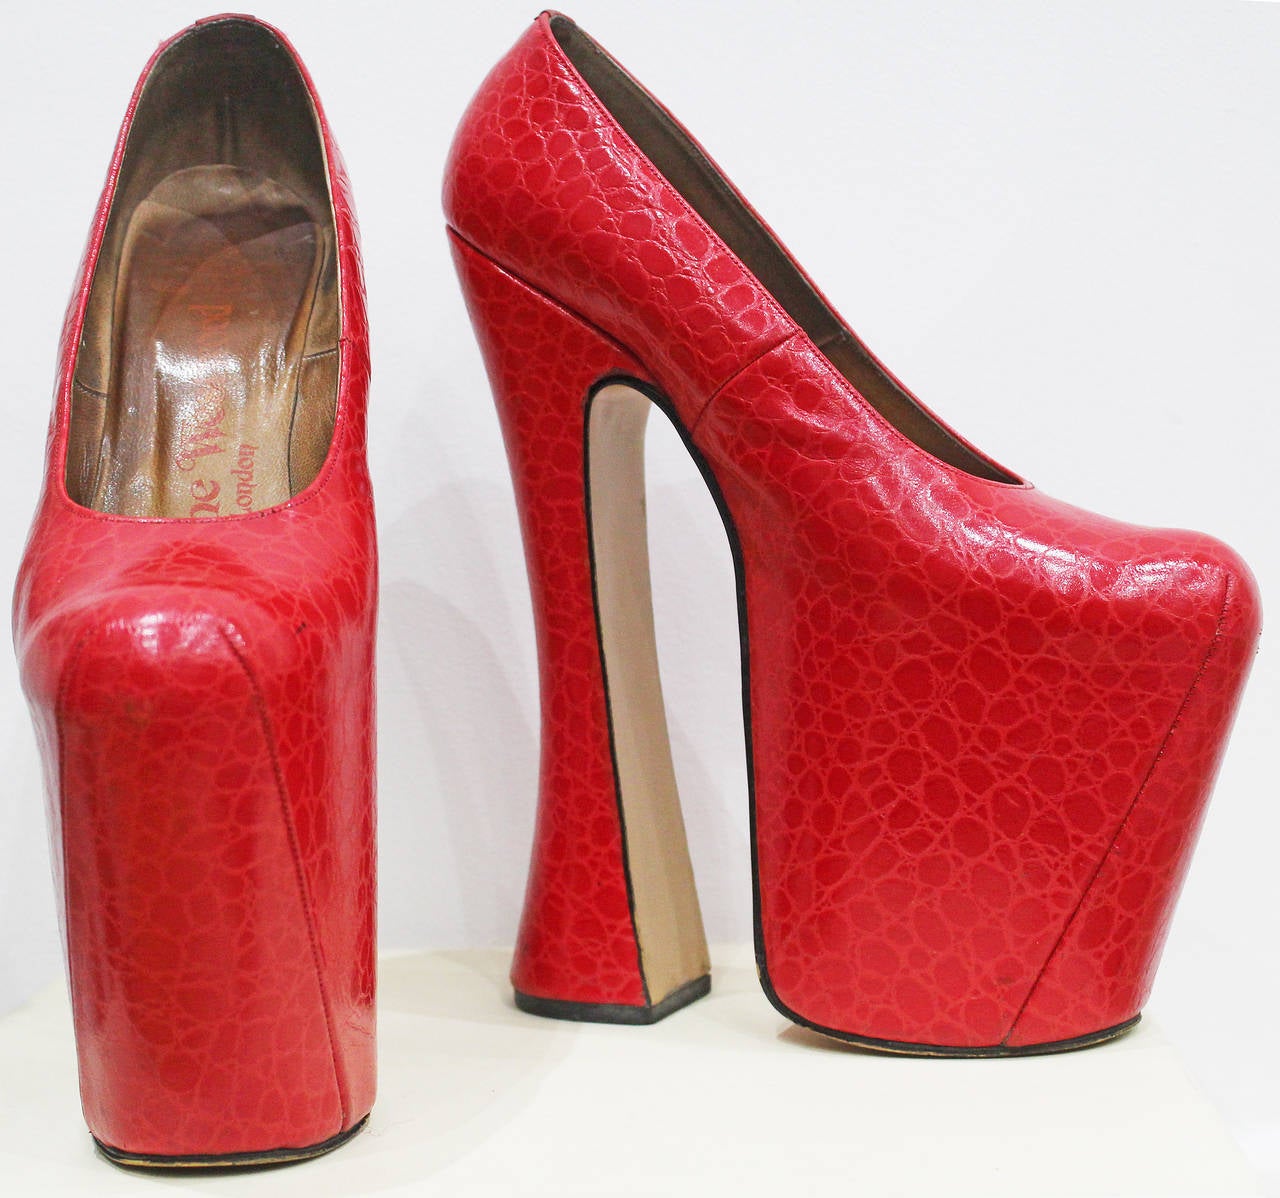 Red Iconic Vivienne Westwood Super elevated court shoe c. 1993